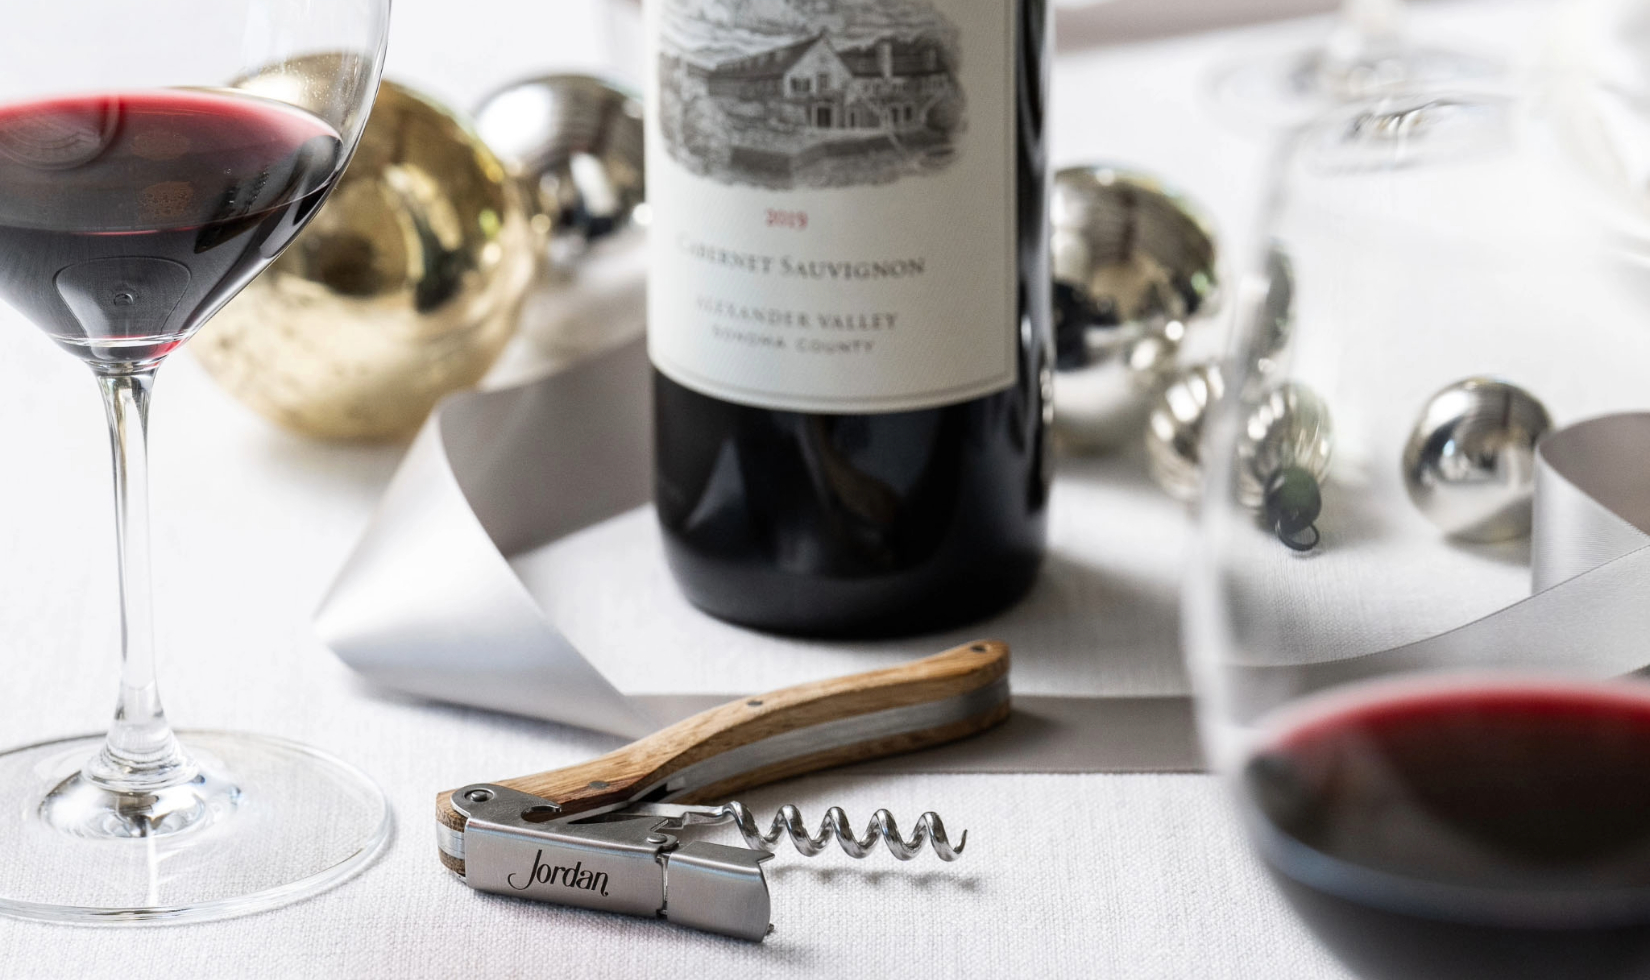 corkscrew with wooden handle in front of bottle of cabernet sauvignon on table decorated with christmas ornaments 